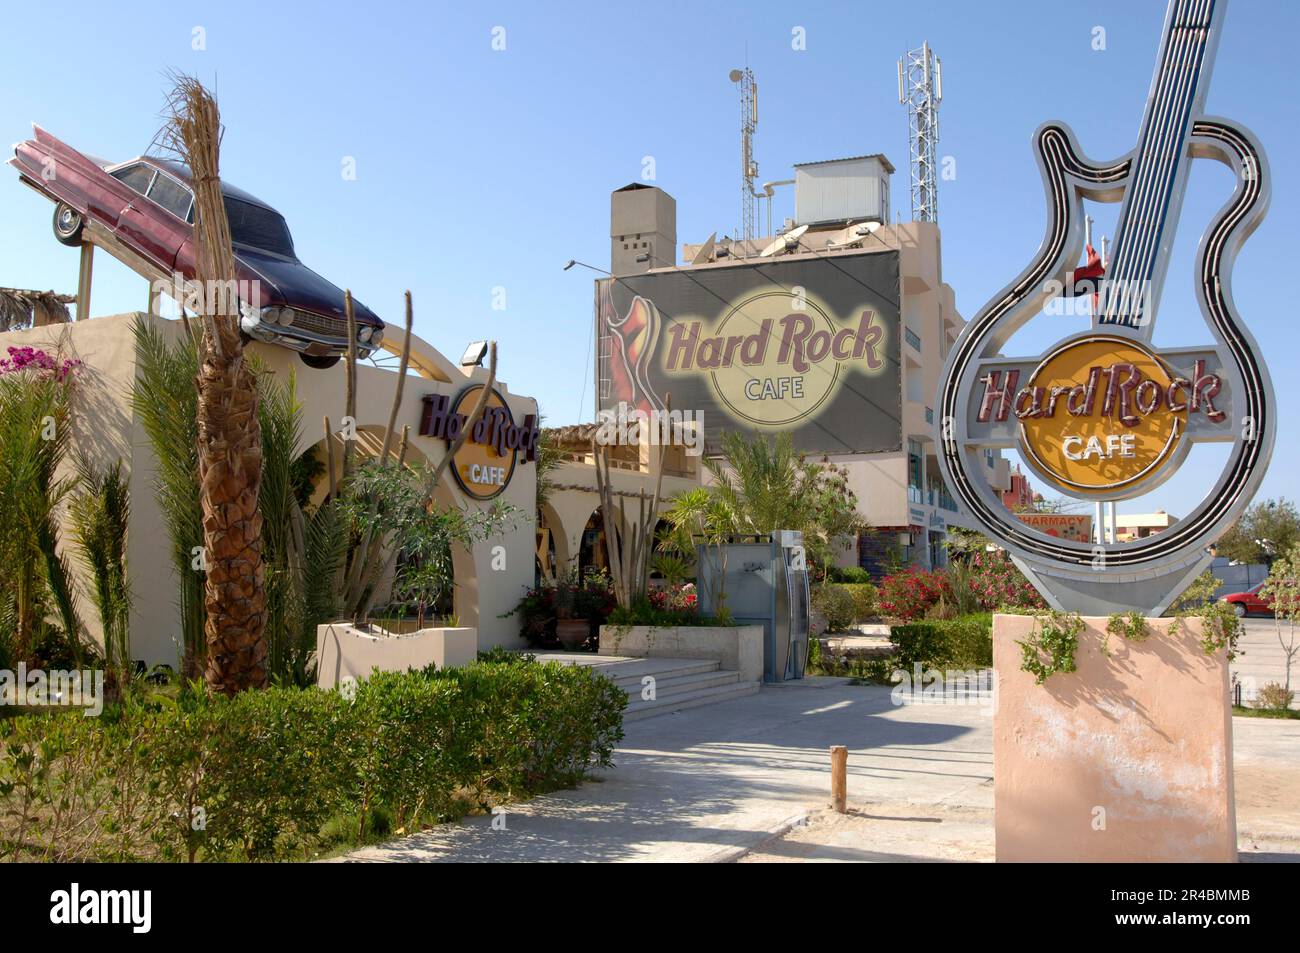 Hard Rock Cafe Hurghada, Egypt - Live Music and Dining in Hurghada